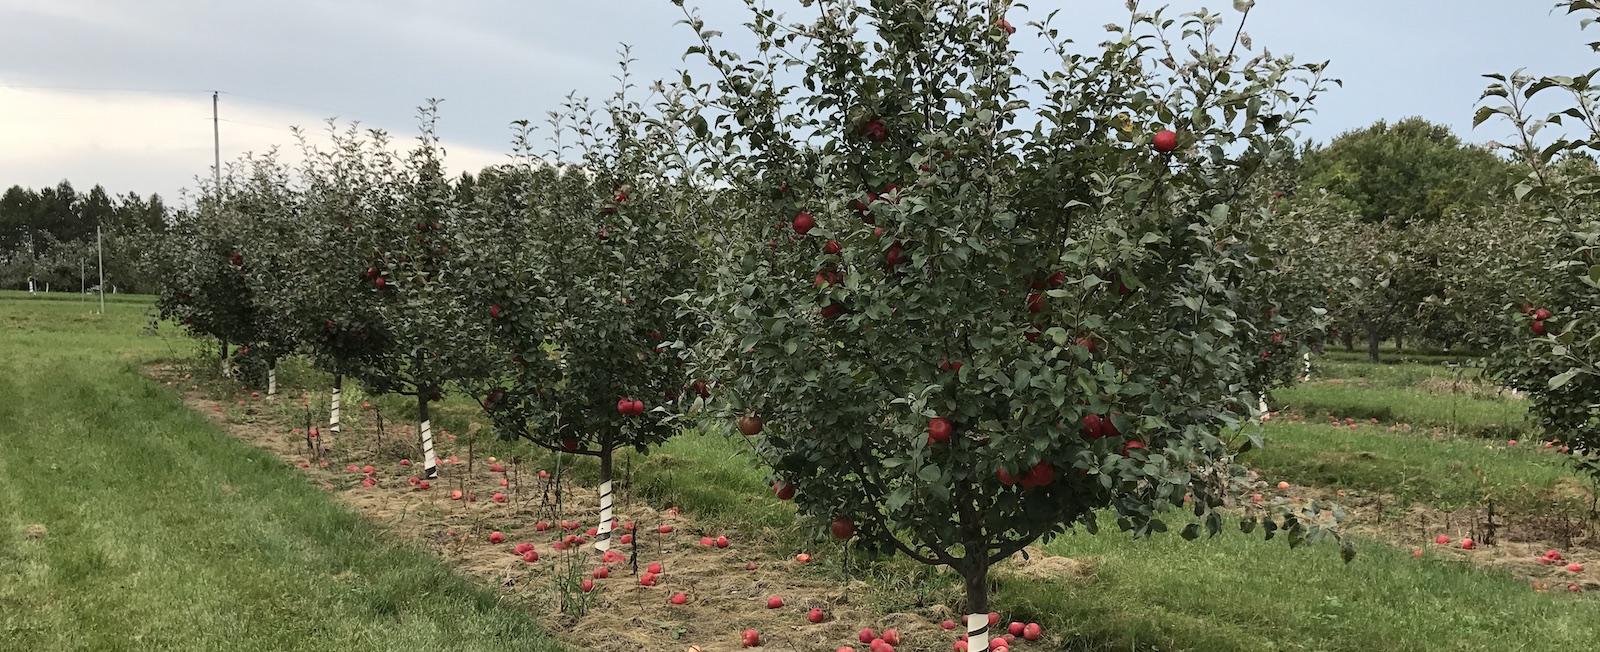 Row of apple trees with fruit